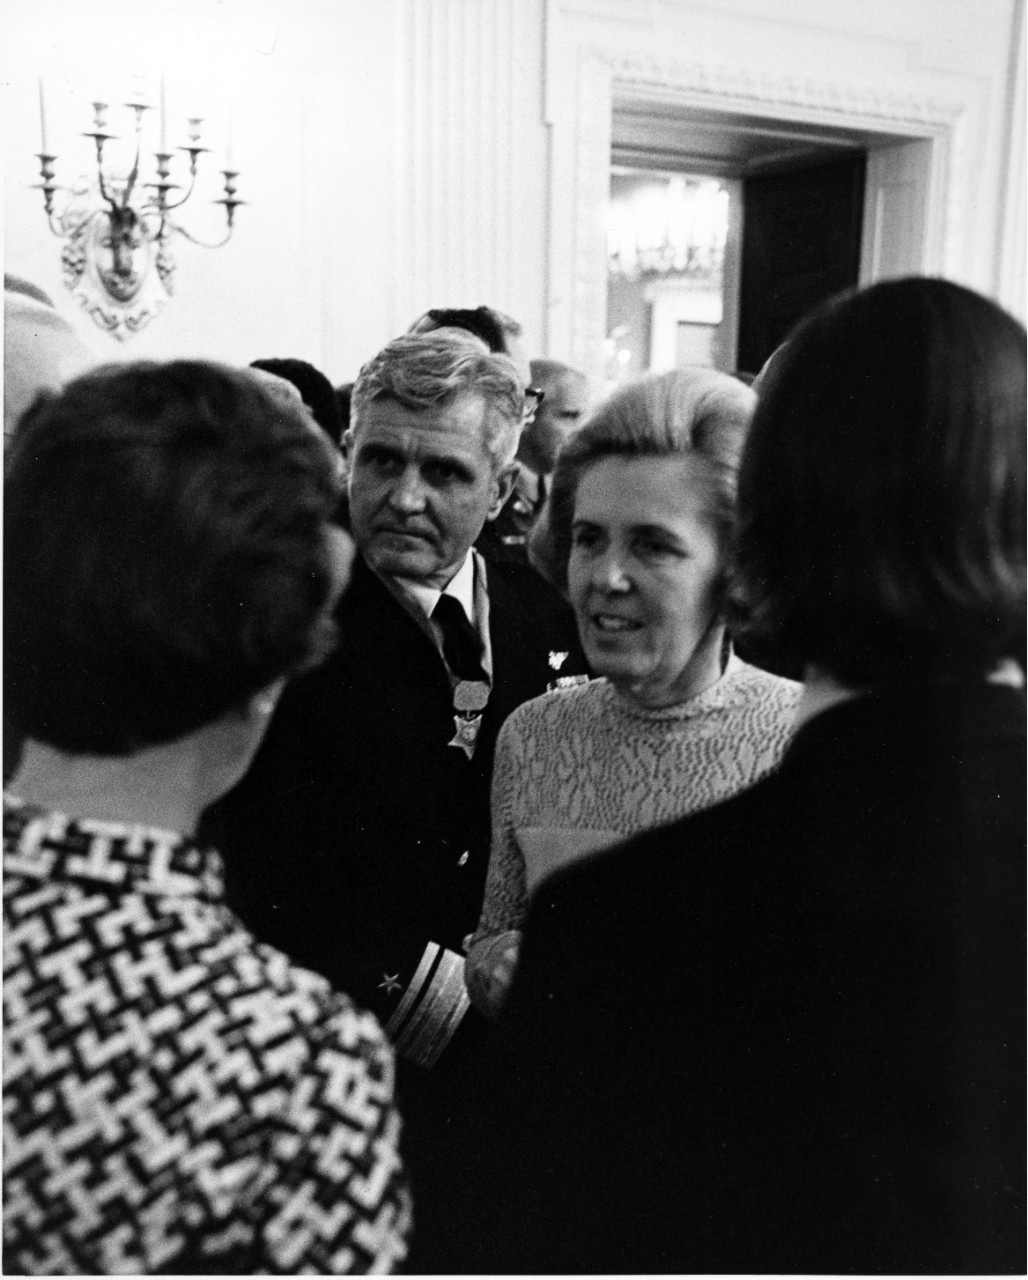 <p>RADM and Mrs. James B. Stockdale, center, chat with guests following the Medal of Honor ceremony in the East Room of the White House. Stockdale wears the medal awarded to him by President Gerald R. Ford during the ceremony. March 4, 1976.</p>
